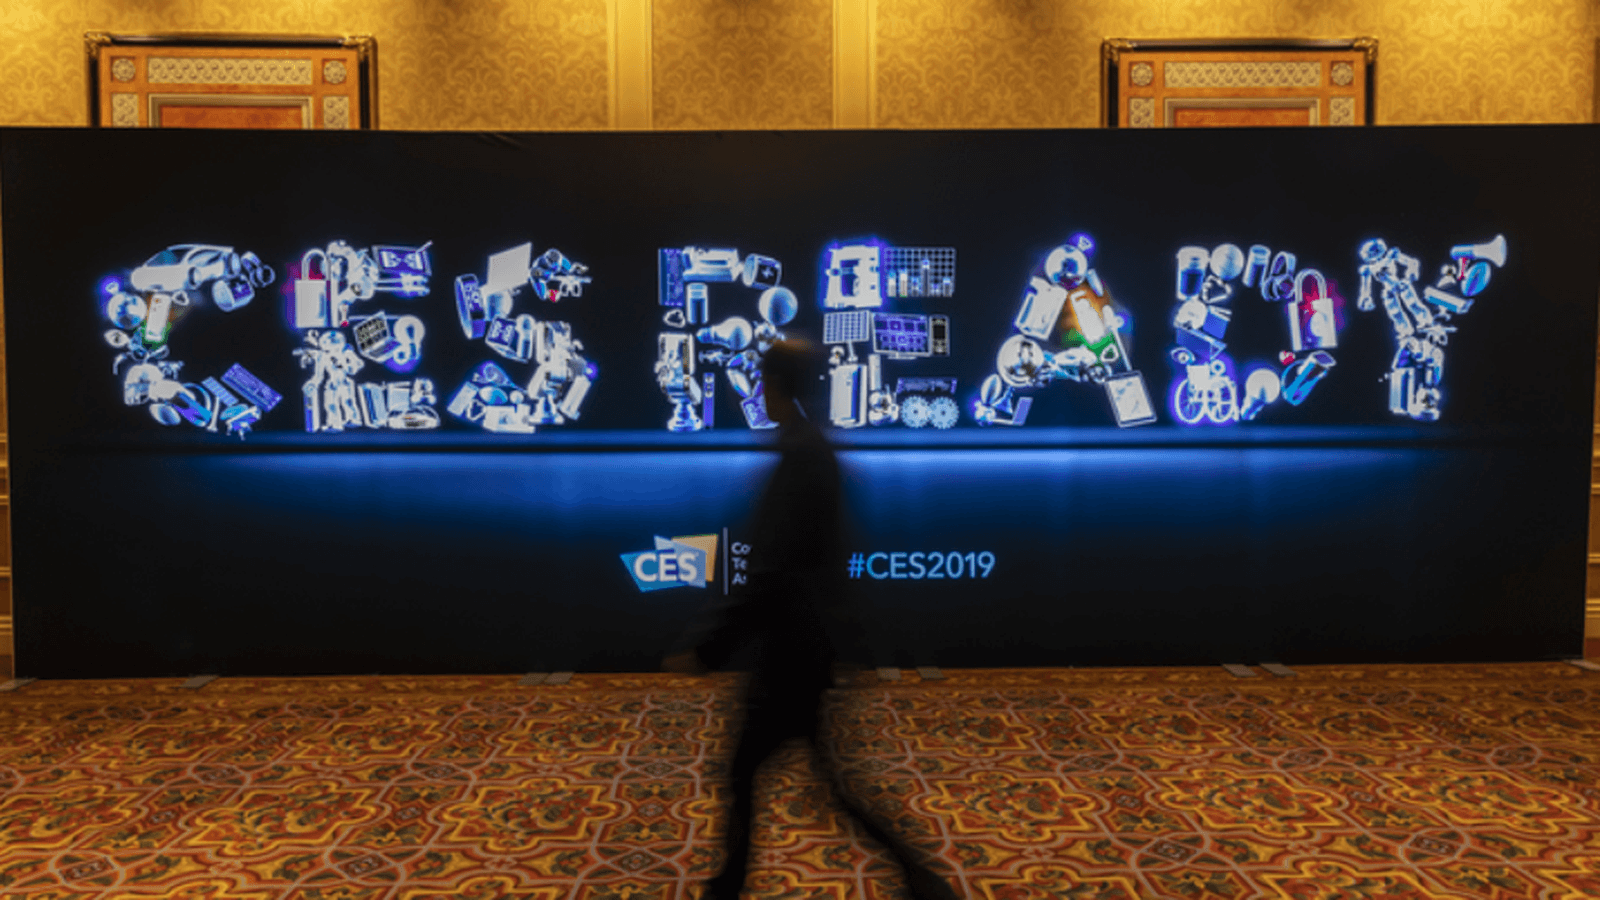 CES 2019 has begun: Here's how to see it as it happens